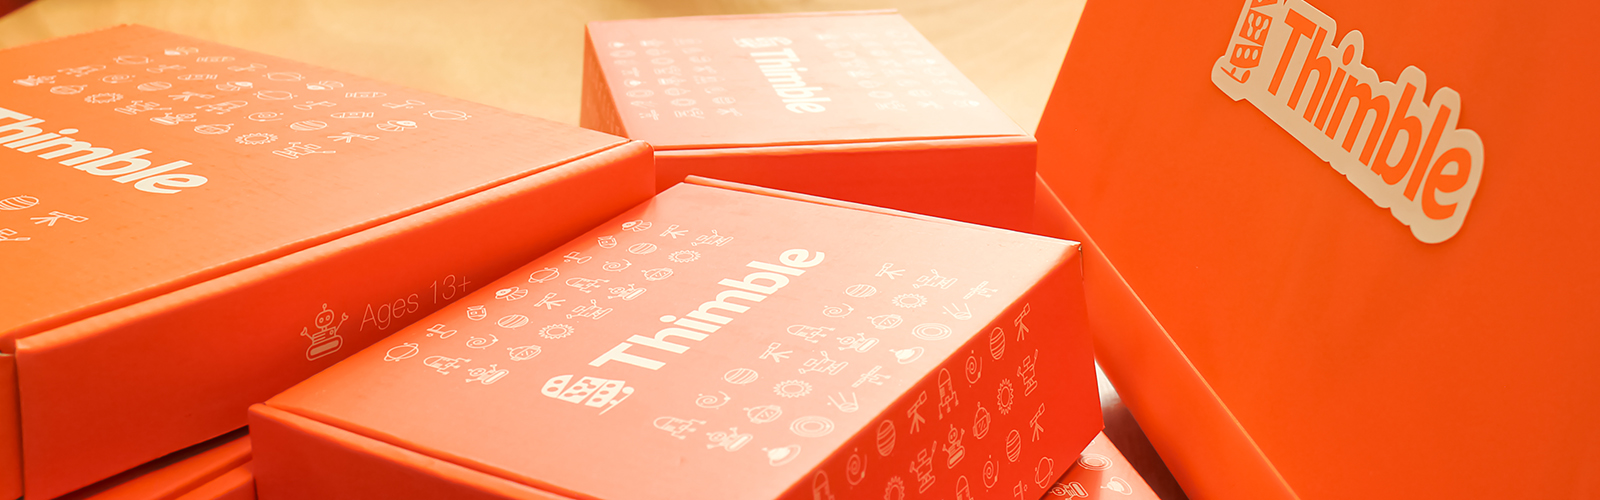 Thimble.io’s home-delivered toy kits make electronics more accessible, inspiring, and fun. 